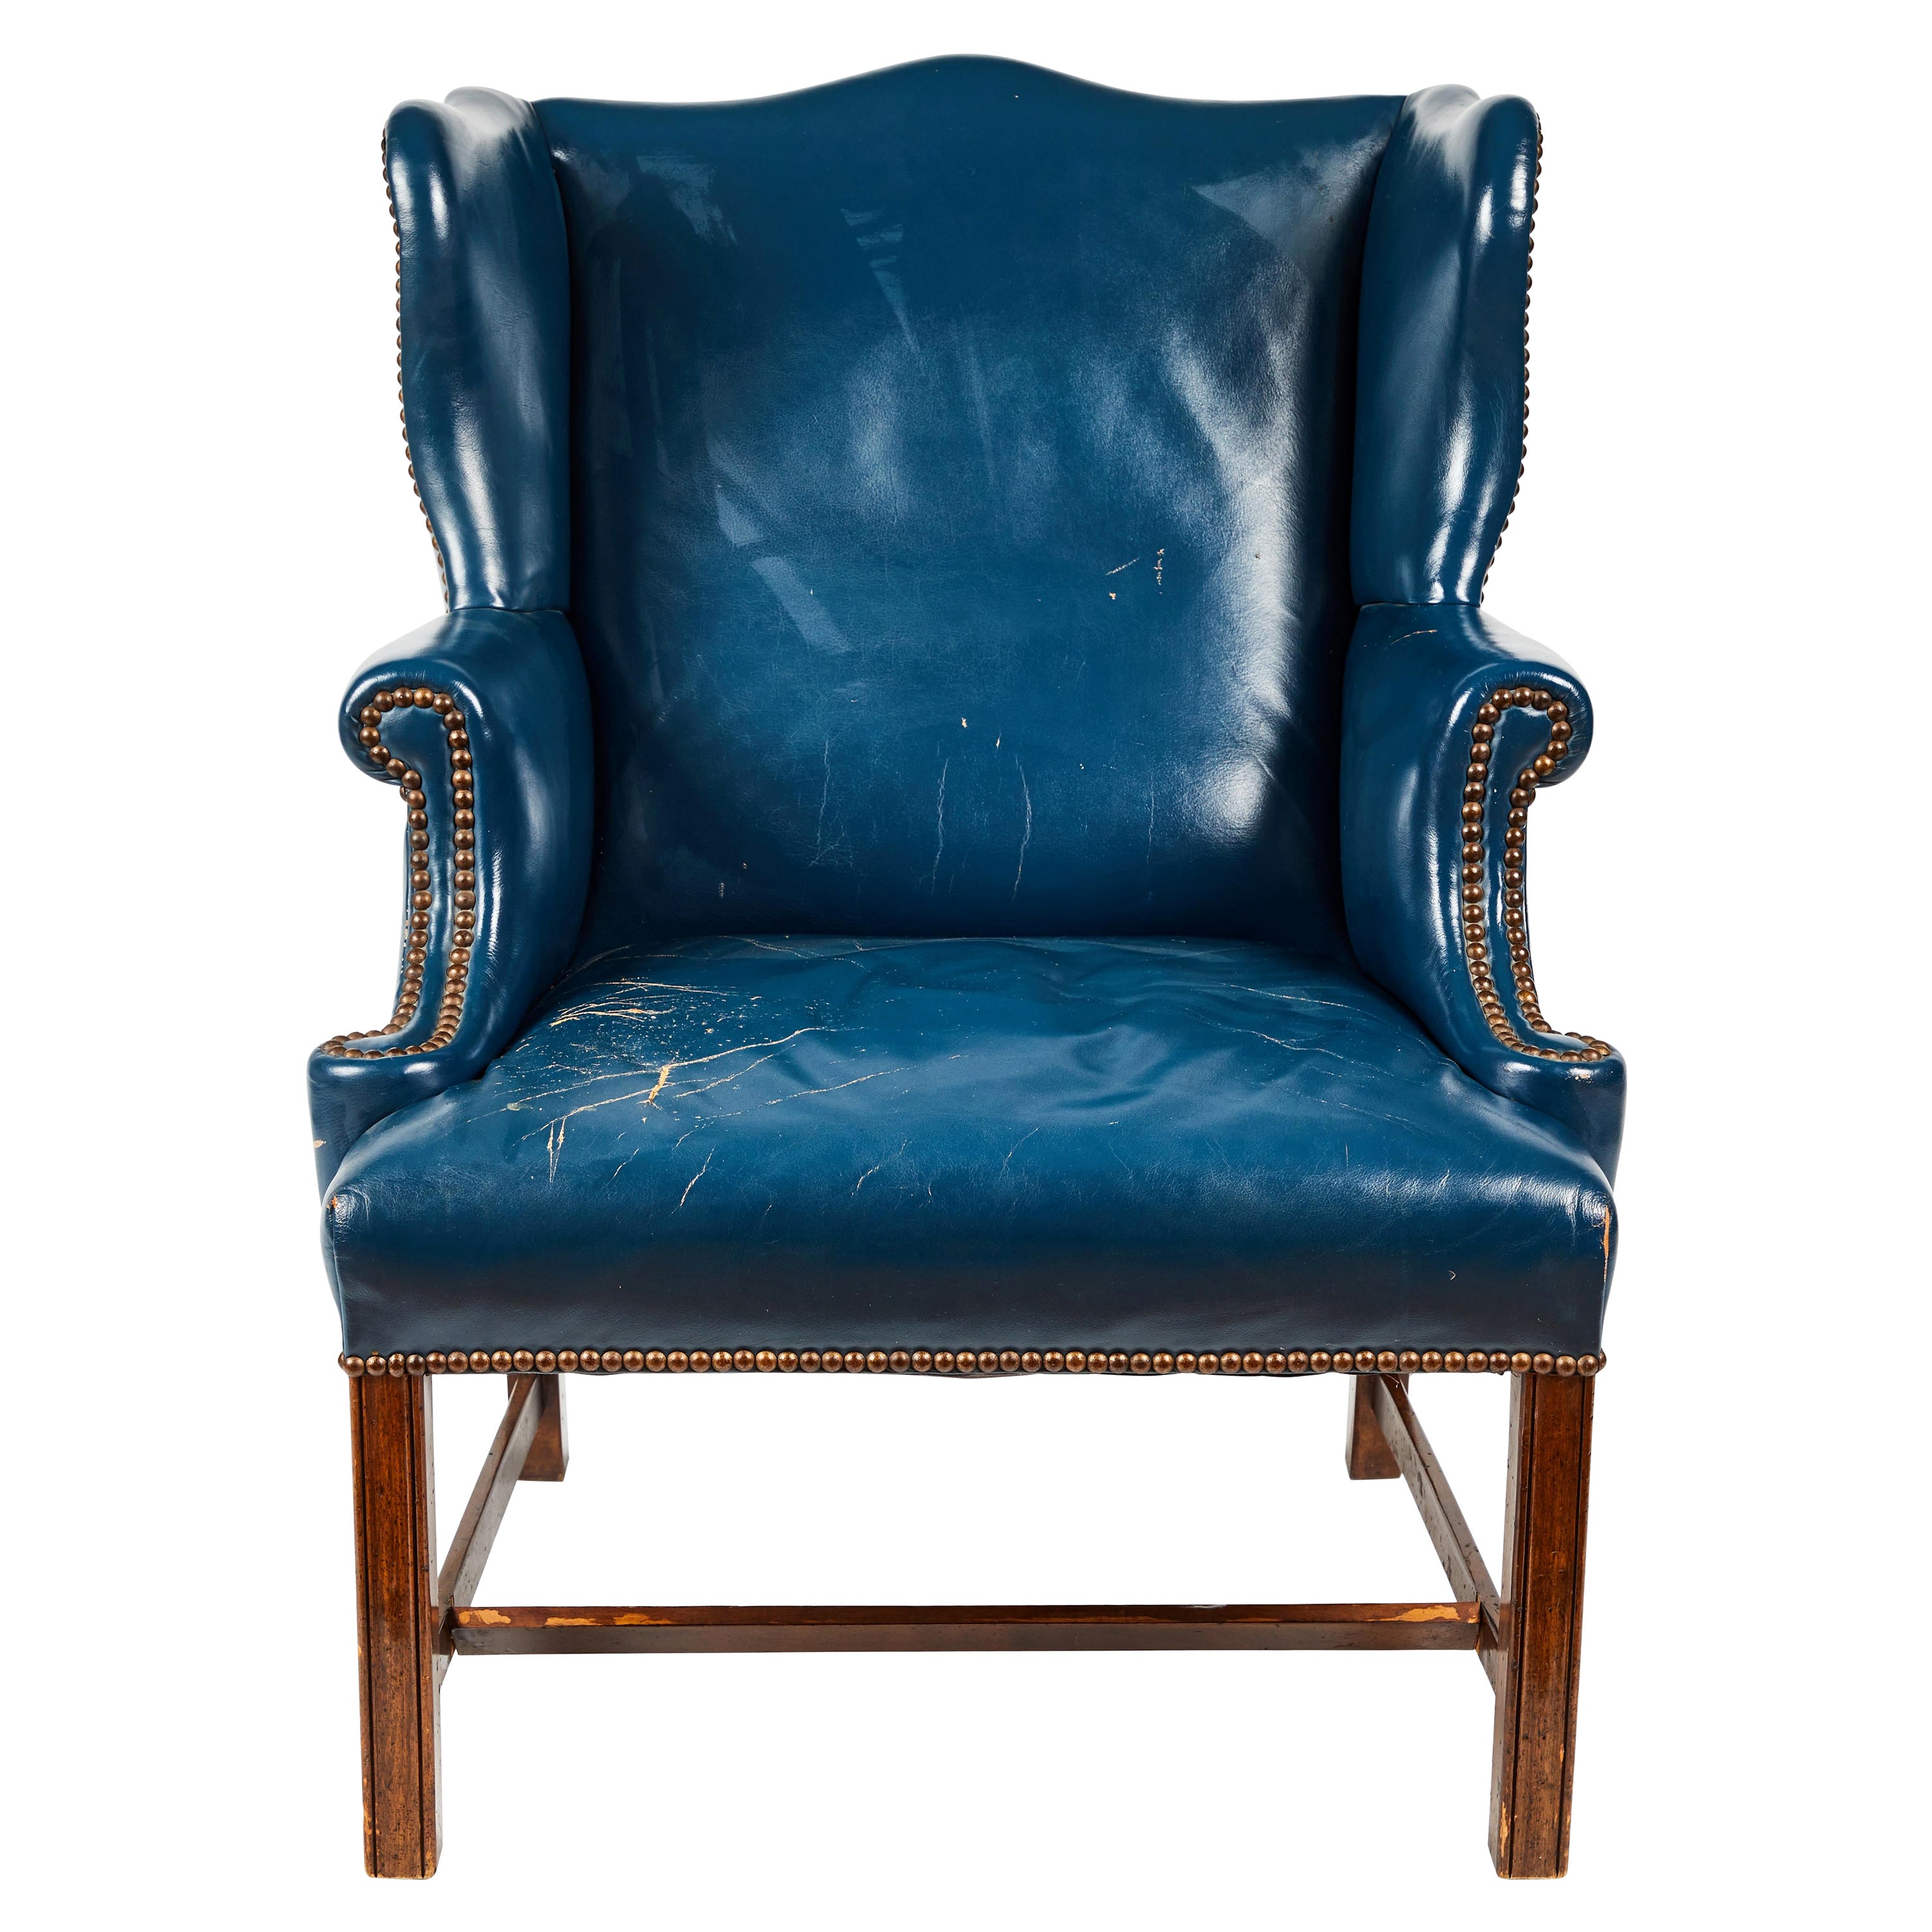 Antique Blue Leather Wingback Chair